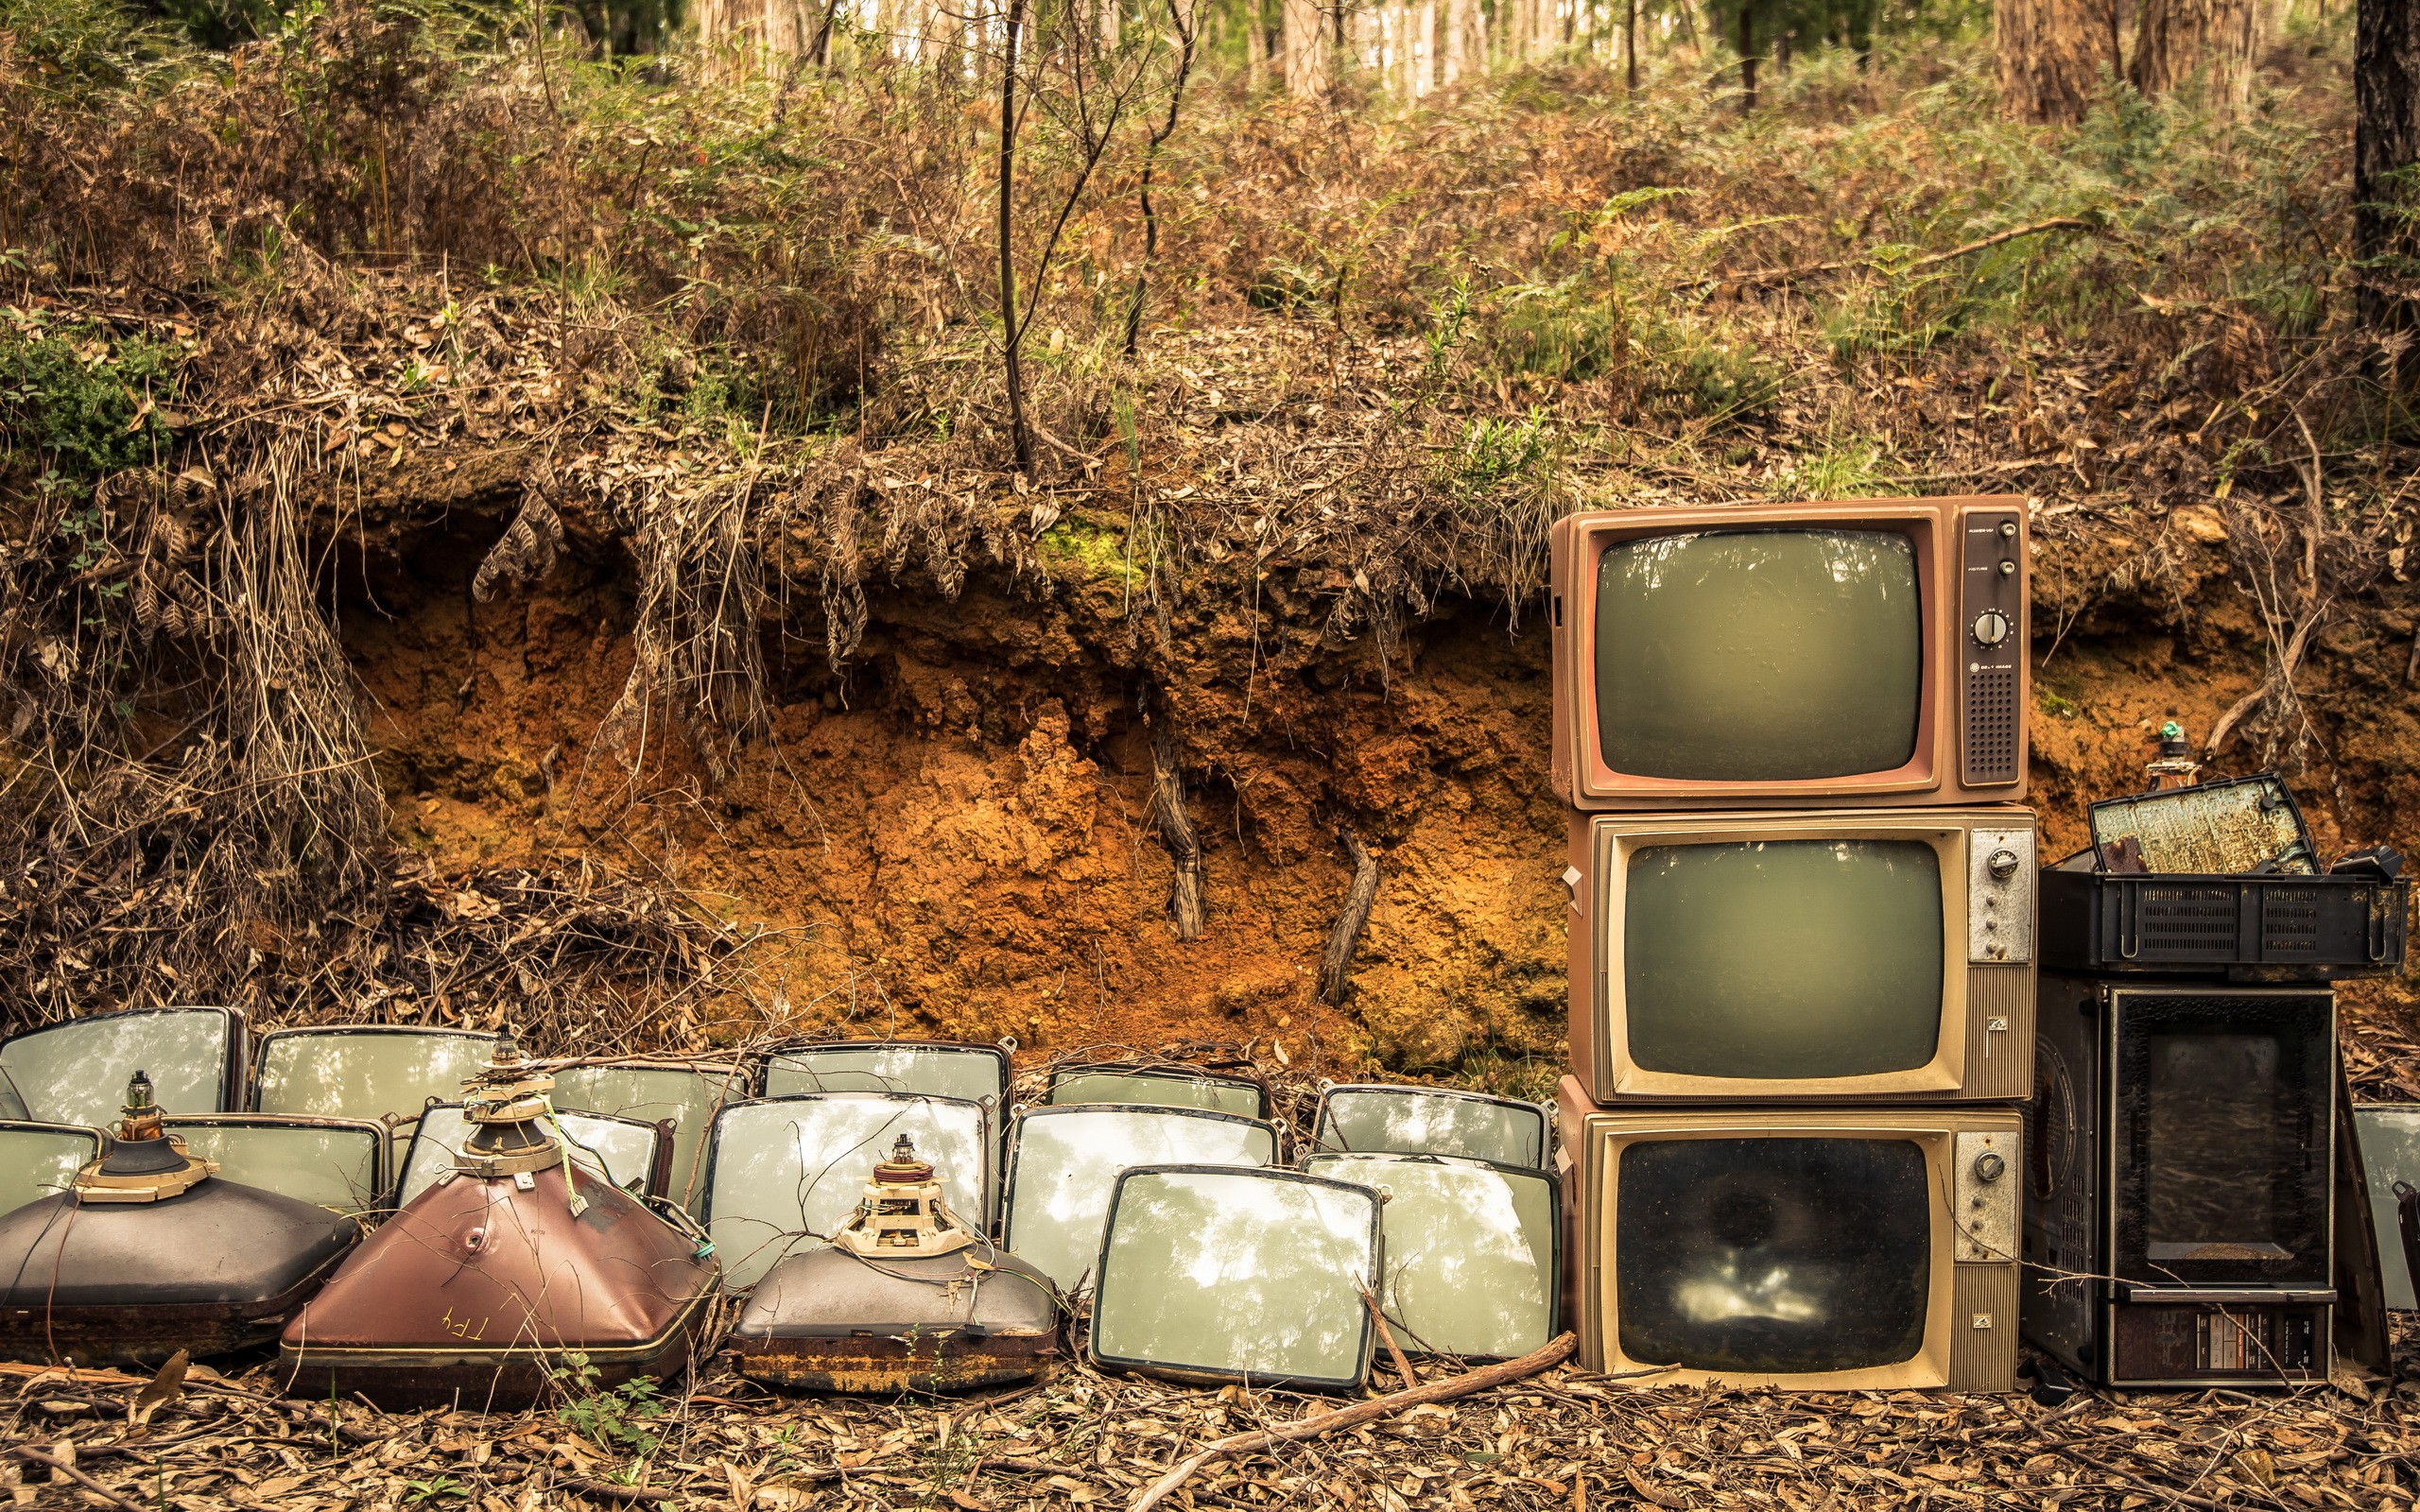 Man Made Television HD Wallpaper | Background Image